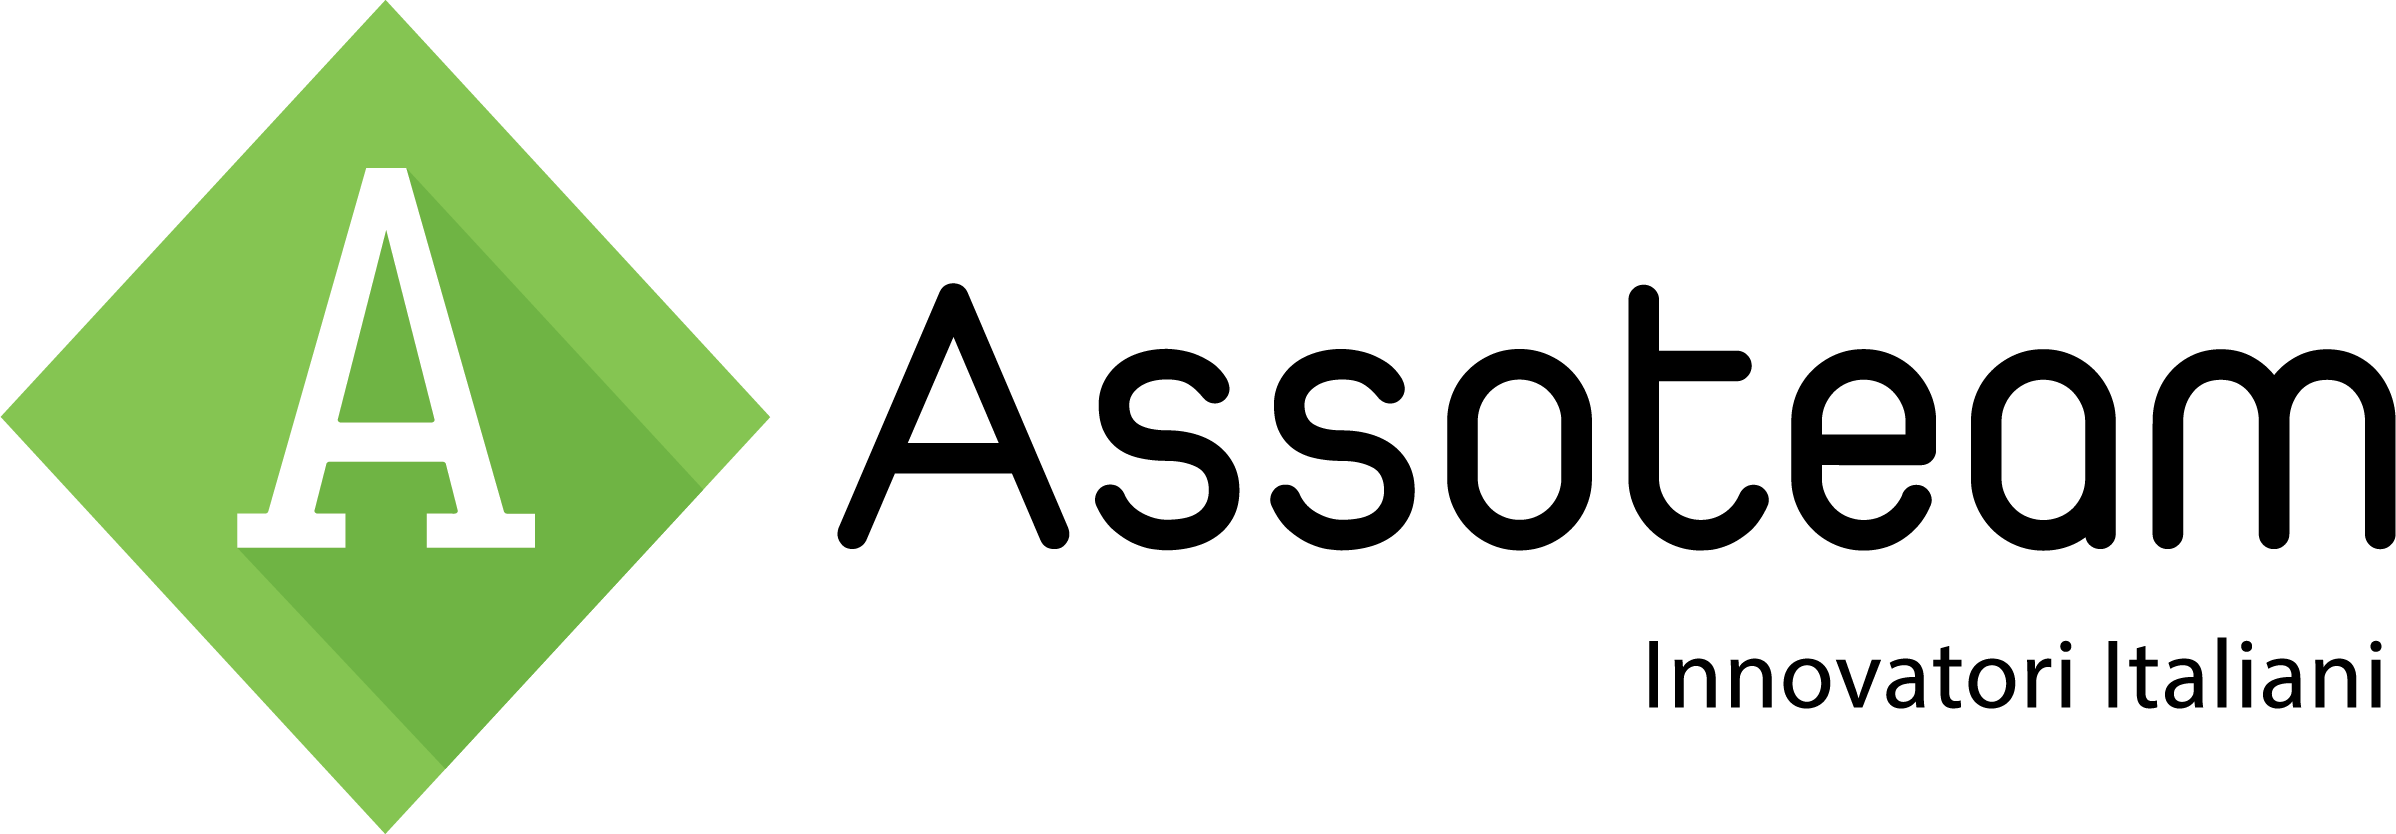 https://sielco.it/wp-content/uploads/2020/05/Assoteam_logo_POS_payoff.png